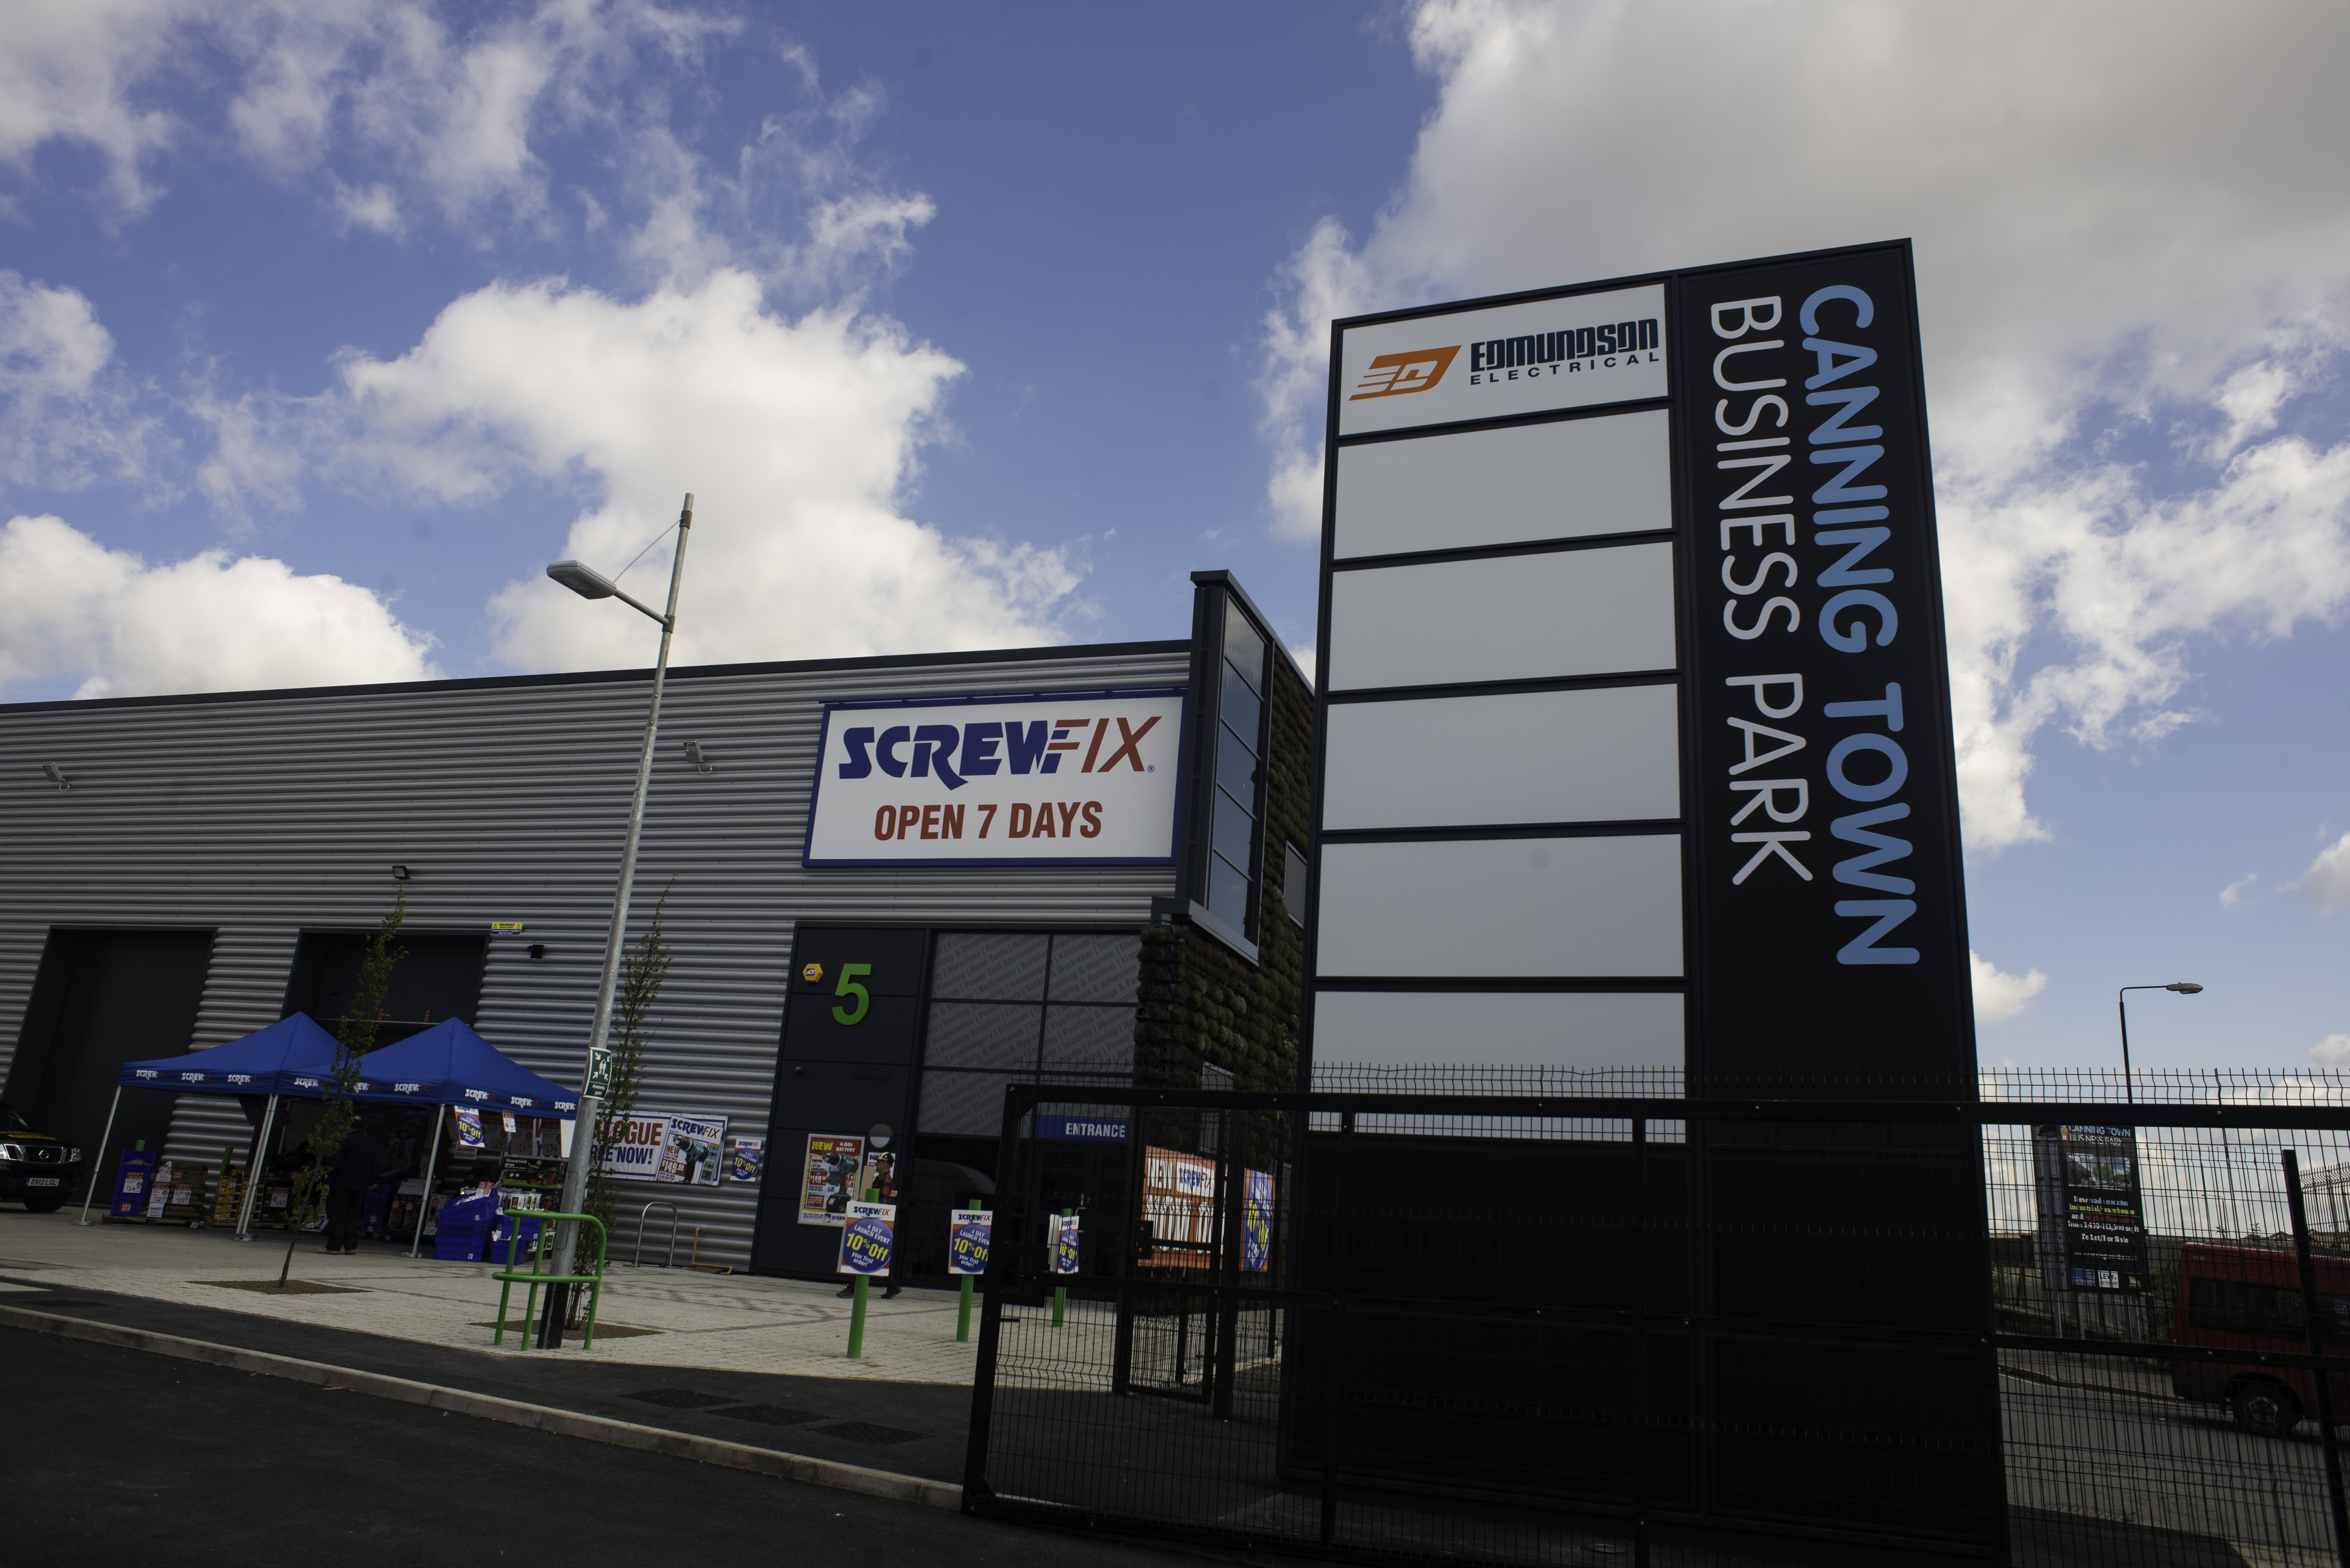 Canning Town’s first Screwfix store is declared a runaway success